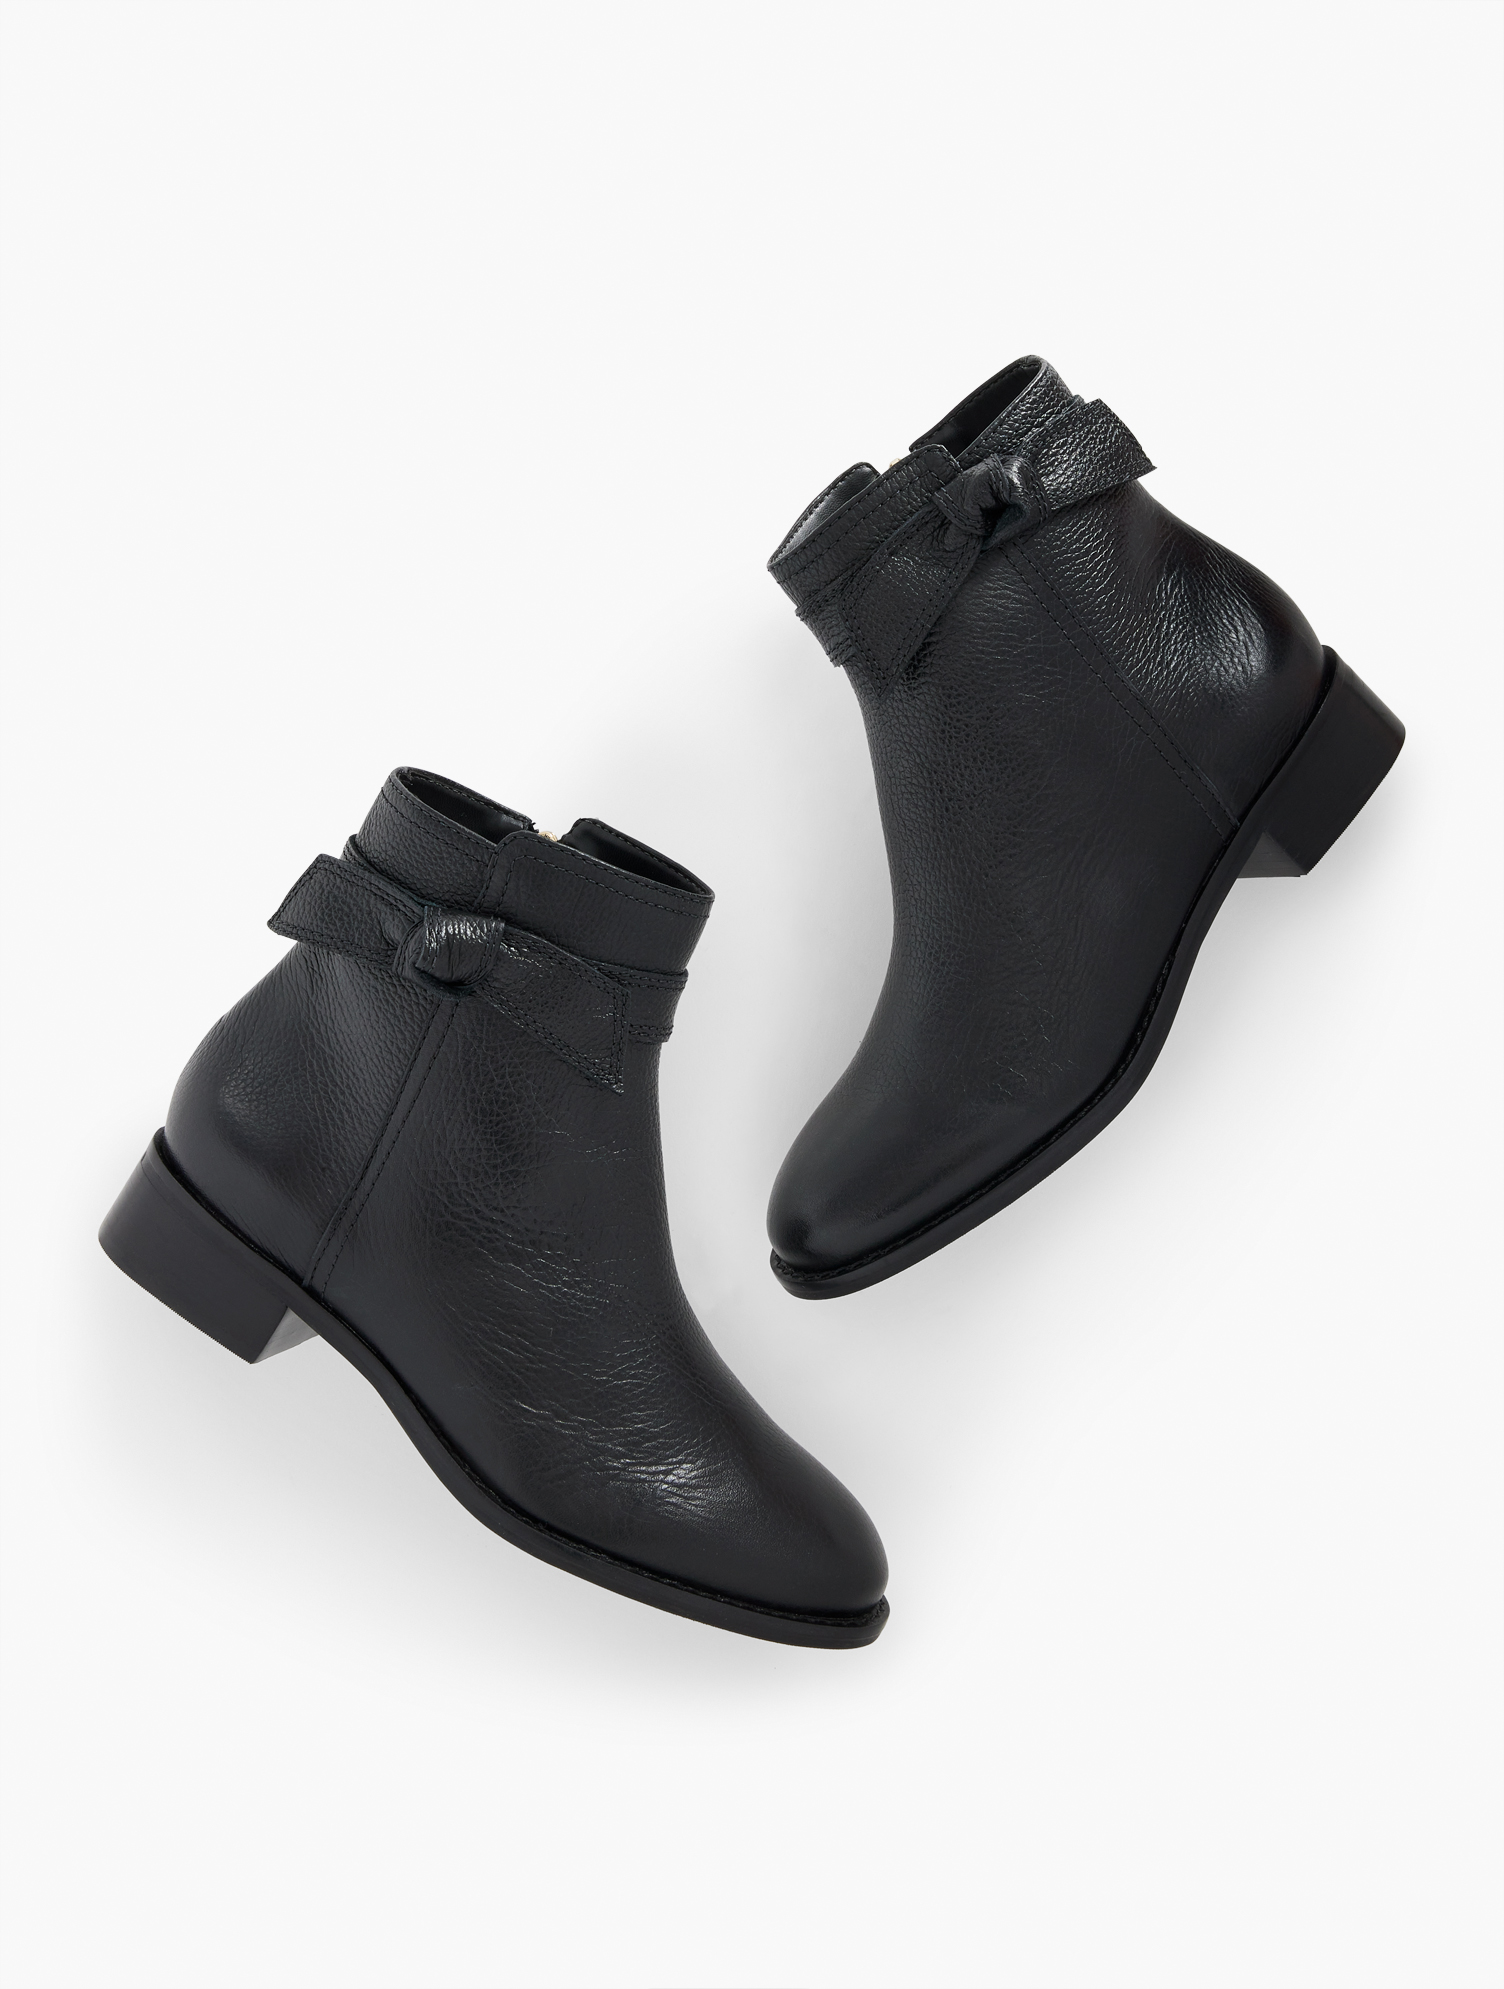 Talbots Tish Bow Ankle Boots - Pebble Leather - Black - 11m